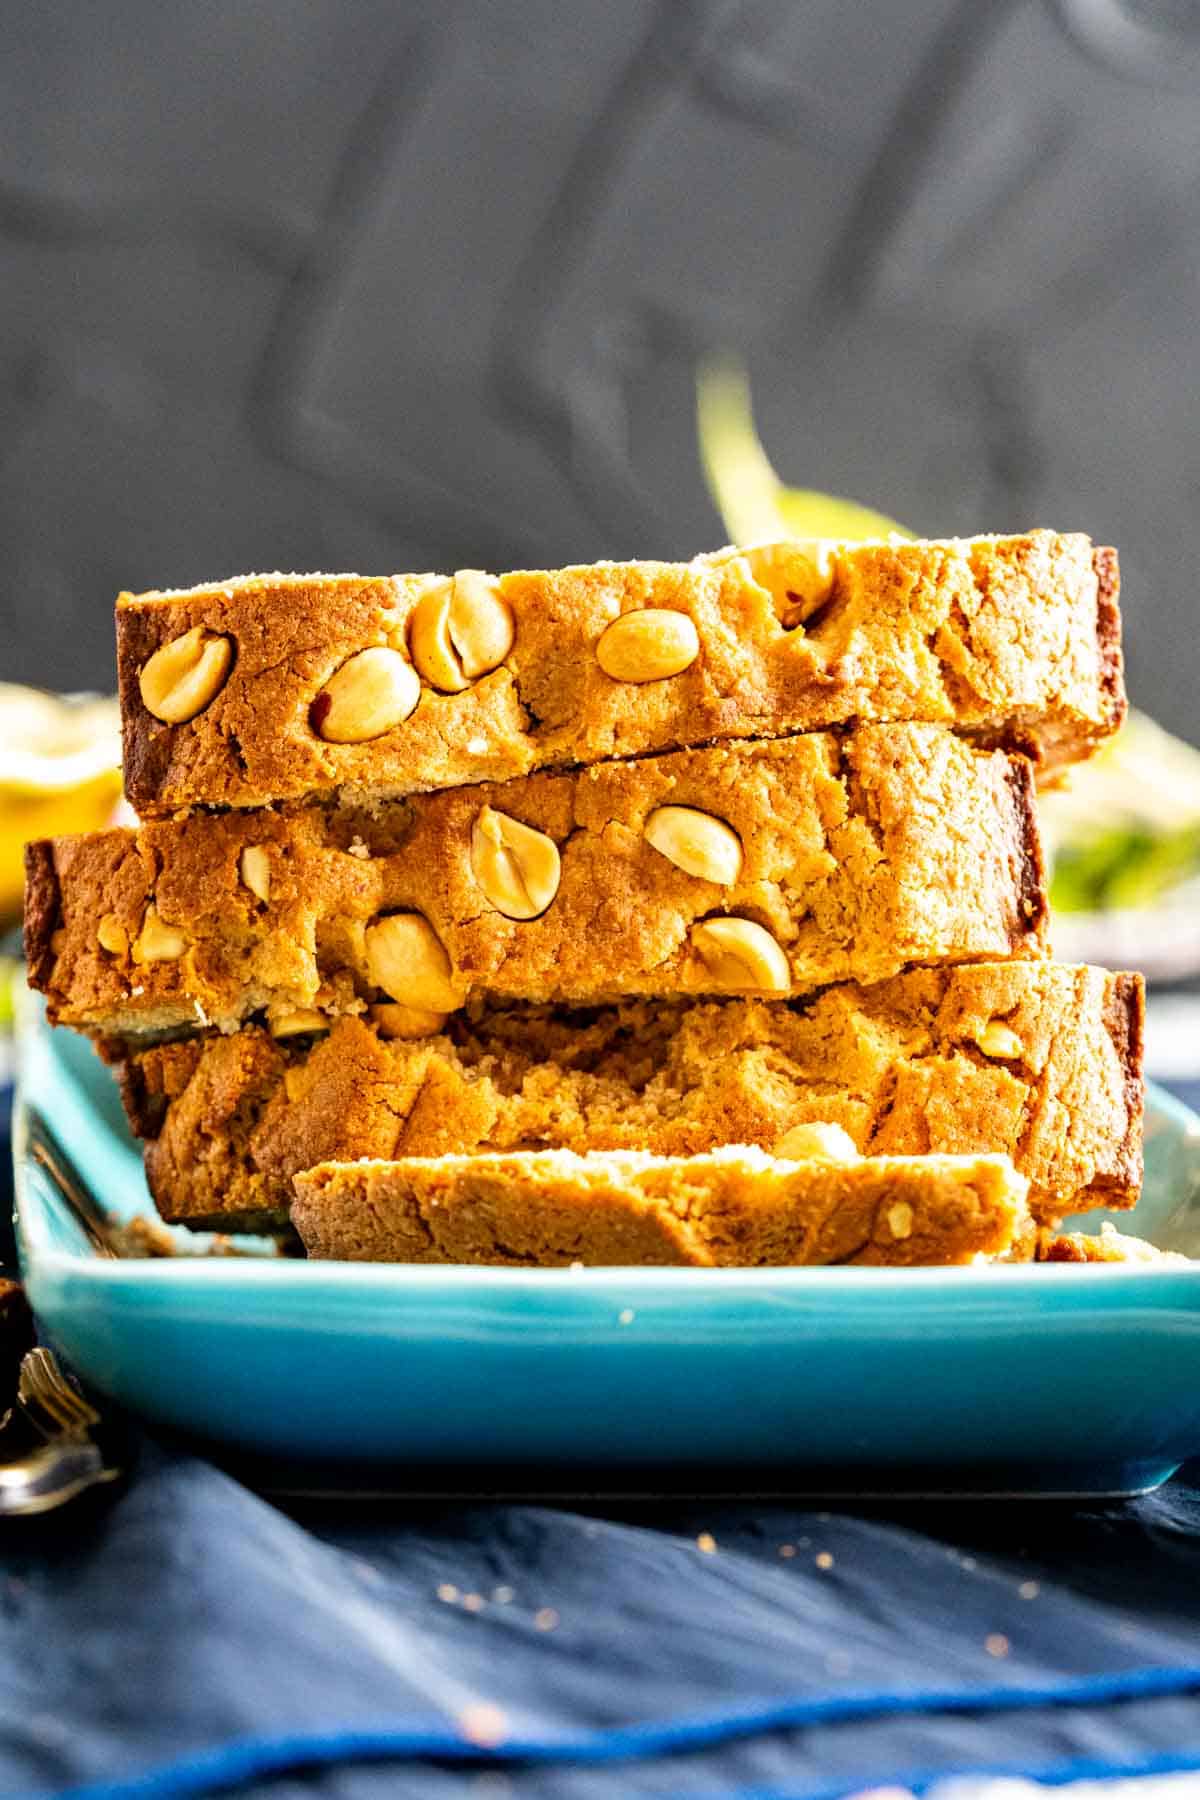 overlapped slices of quick bread with peanuts sprinkled on the top.